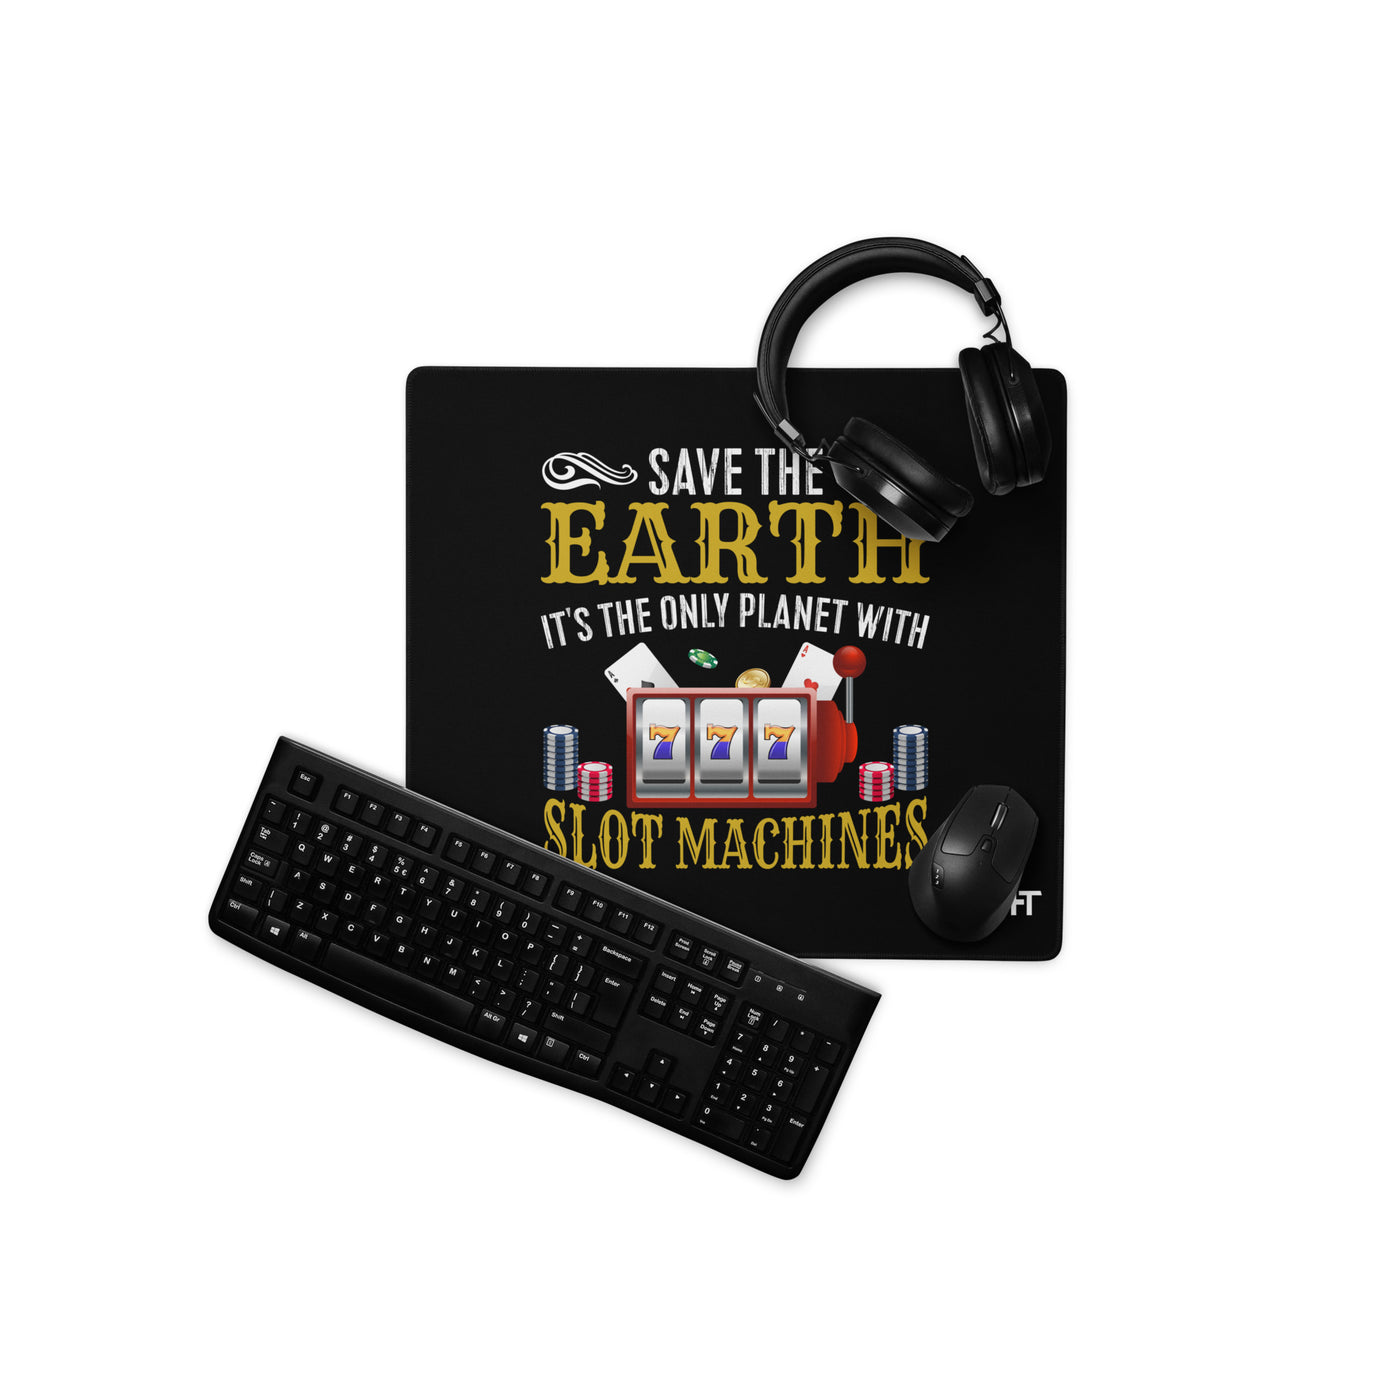 Save the Earth; it's the only Planet with Slot Machines - Desk Mat